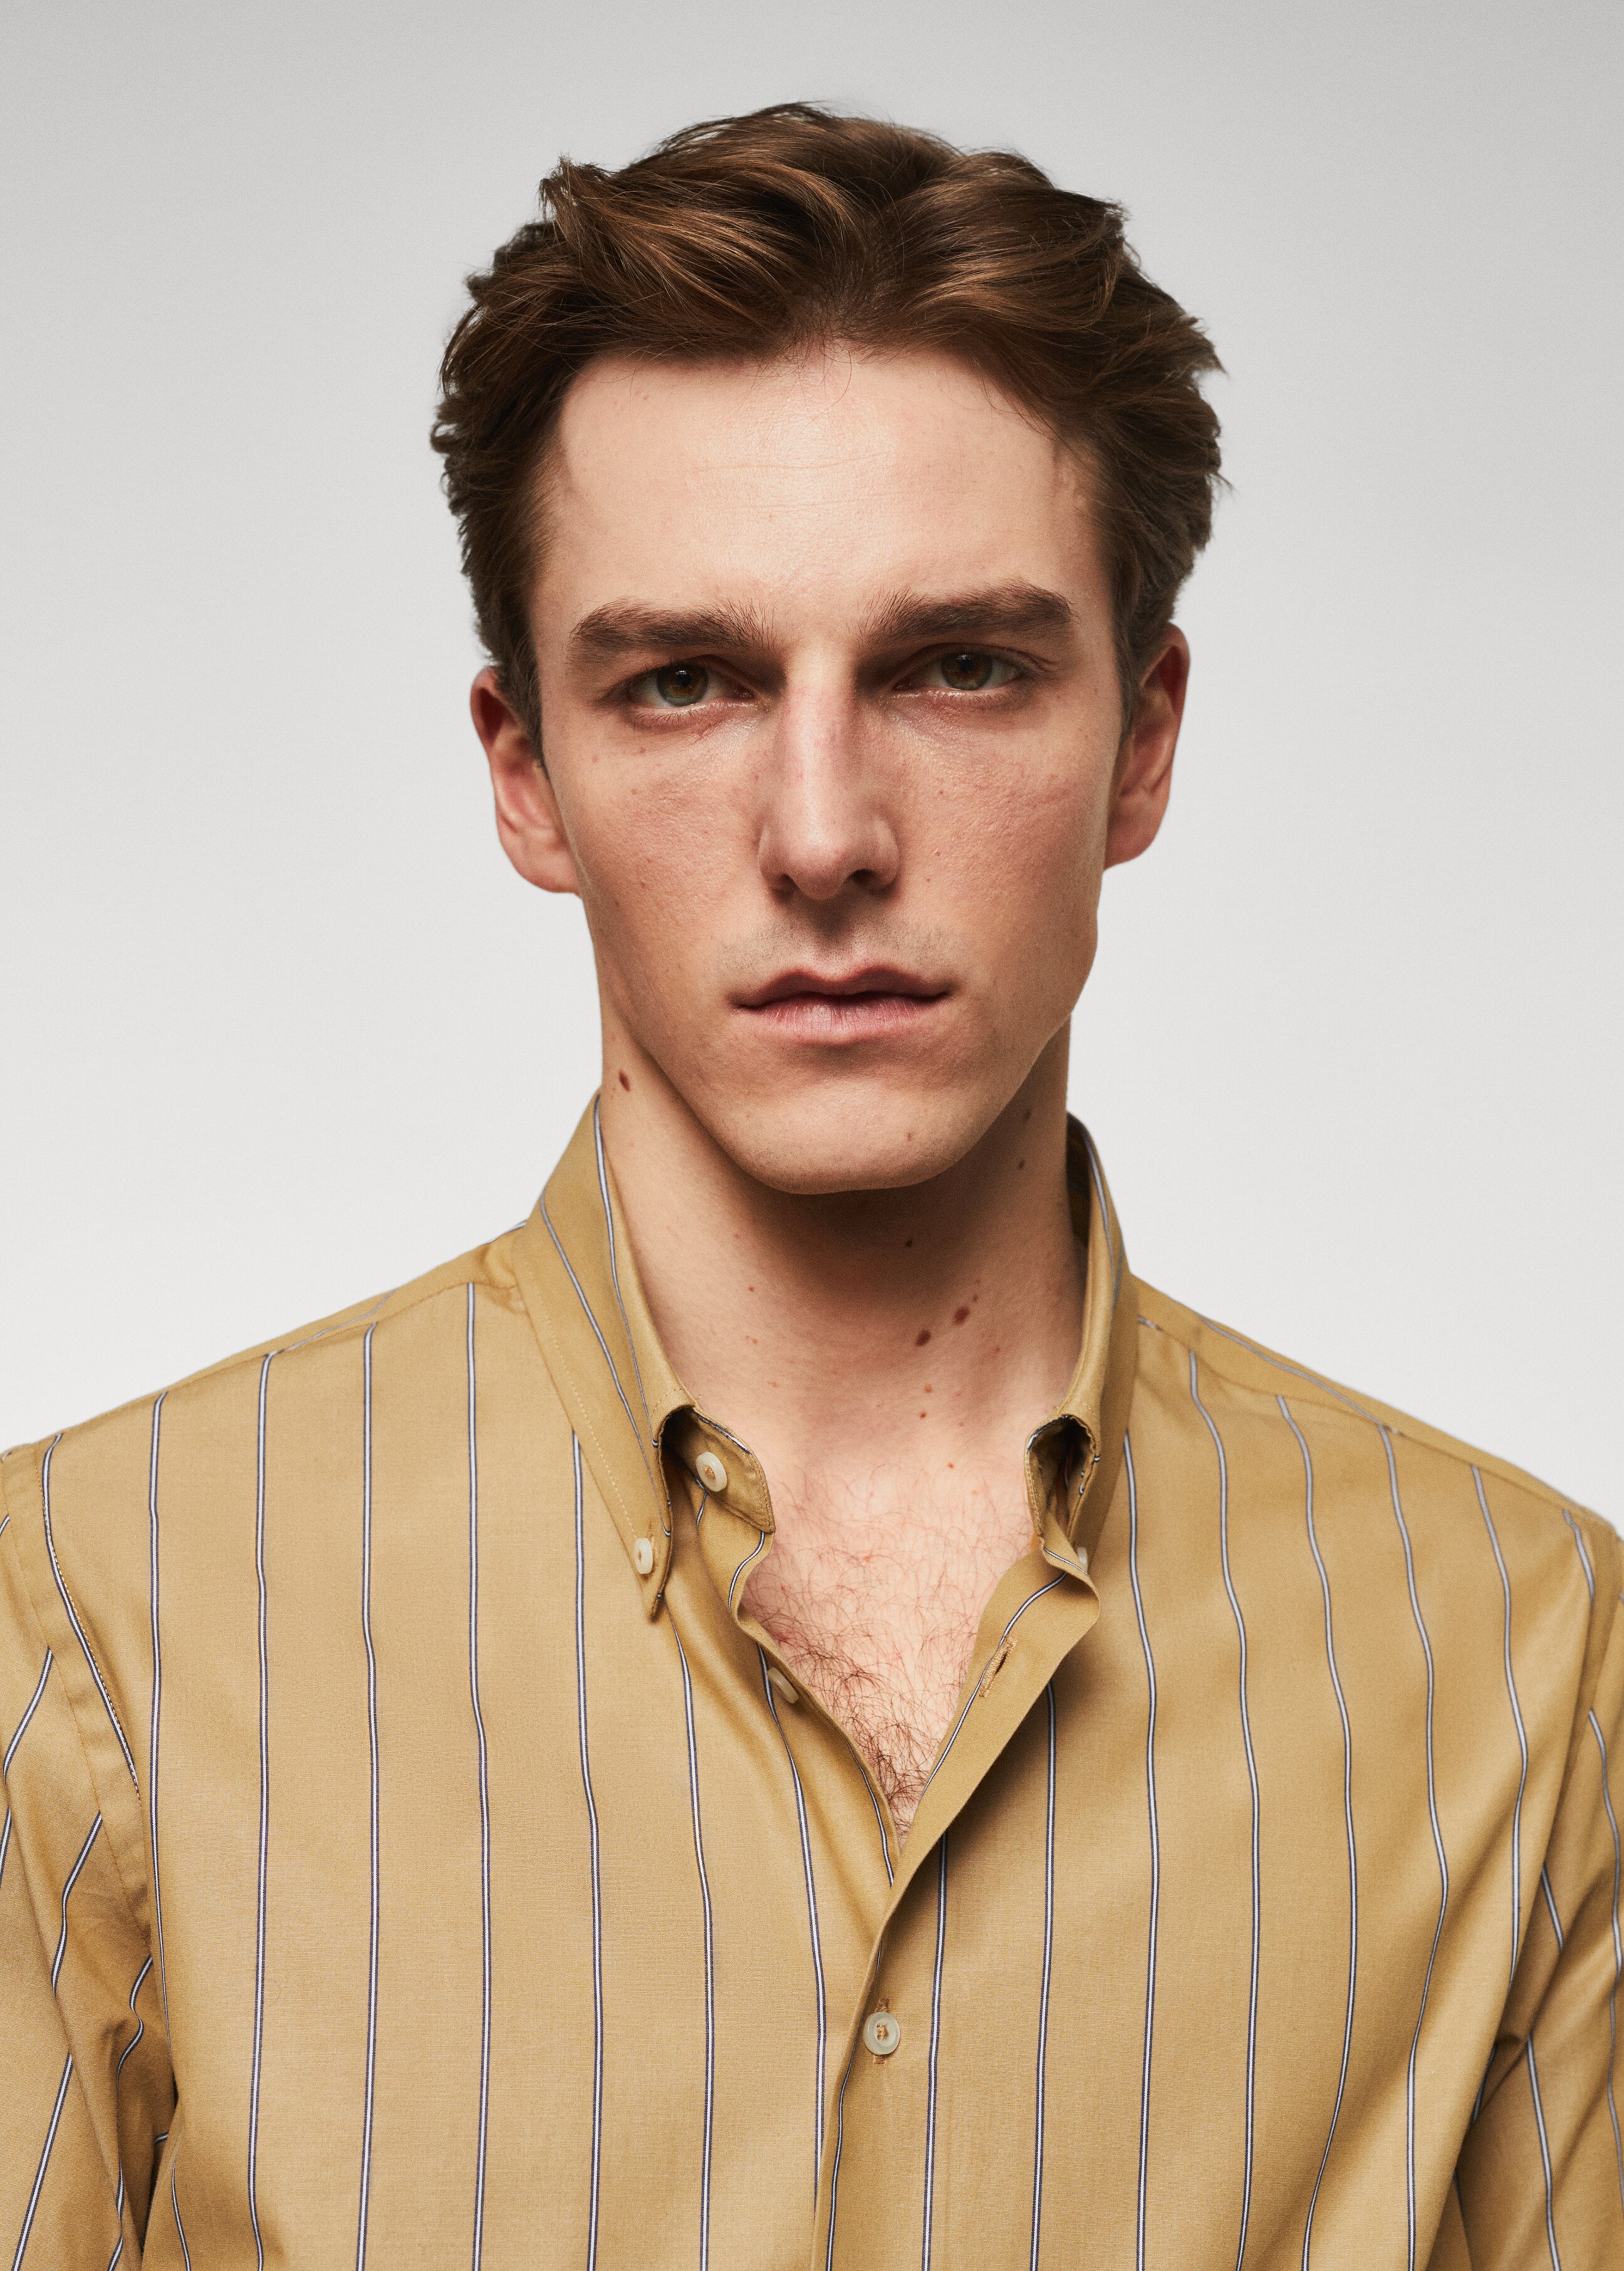 Striped cotton shirt - Details of the article 1